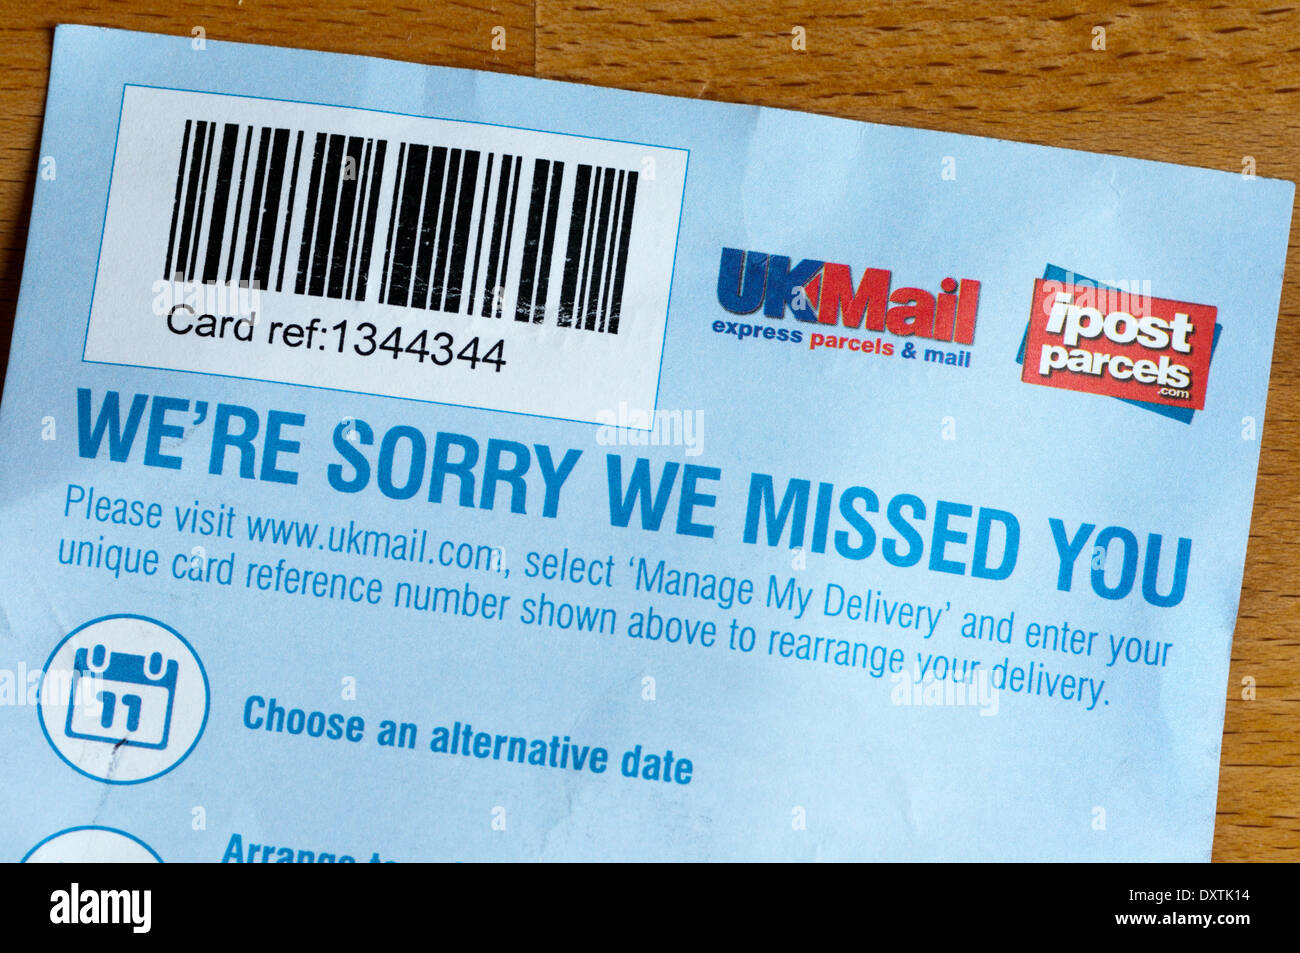 Note left by delivery company or courier unable to deliver parcel. Stock Photo